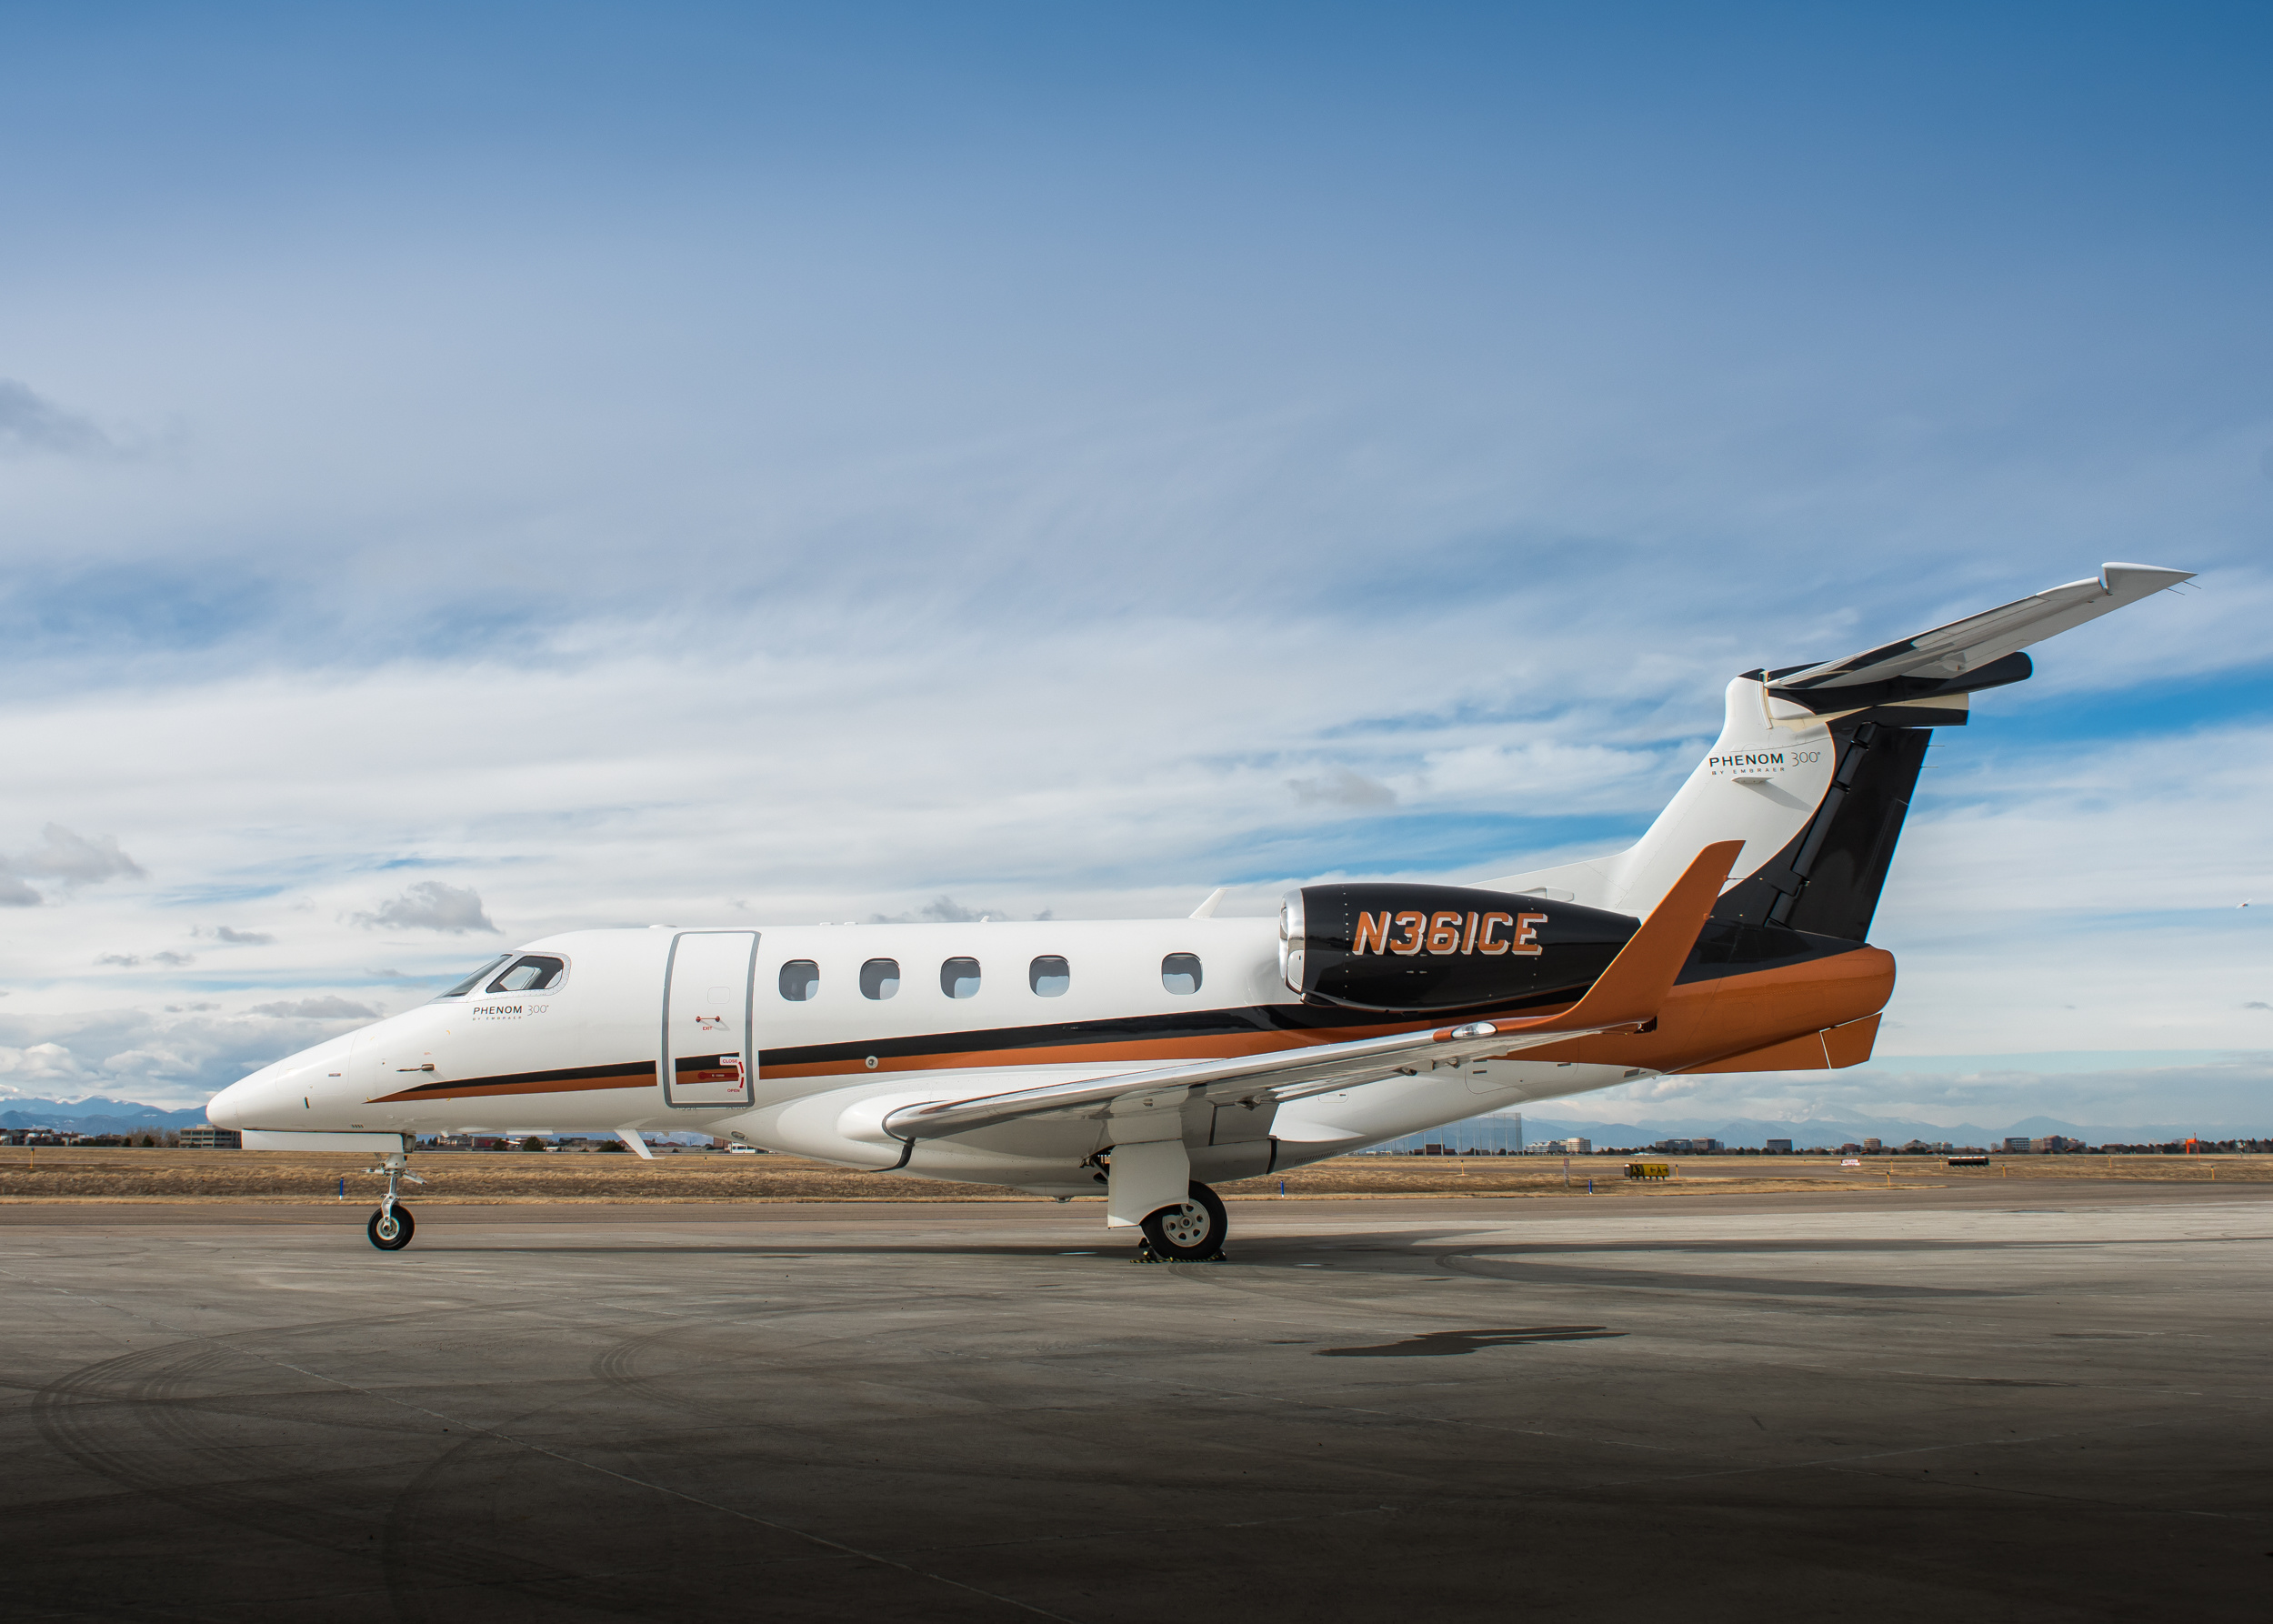 Embraer Phenom, Available for sale, Luxury travel, 2500x1790 HD Desktop